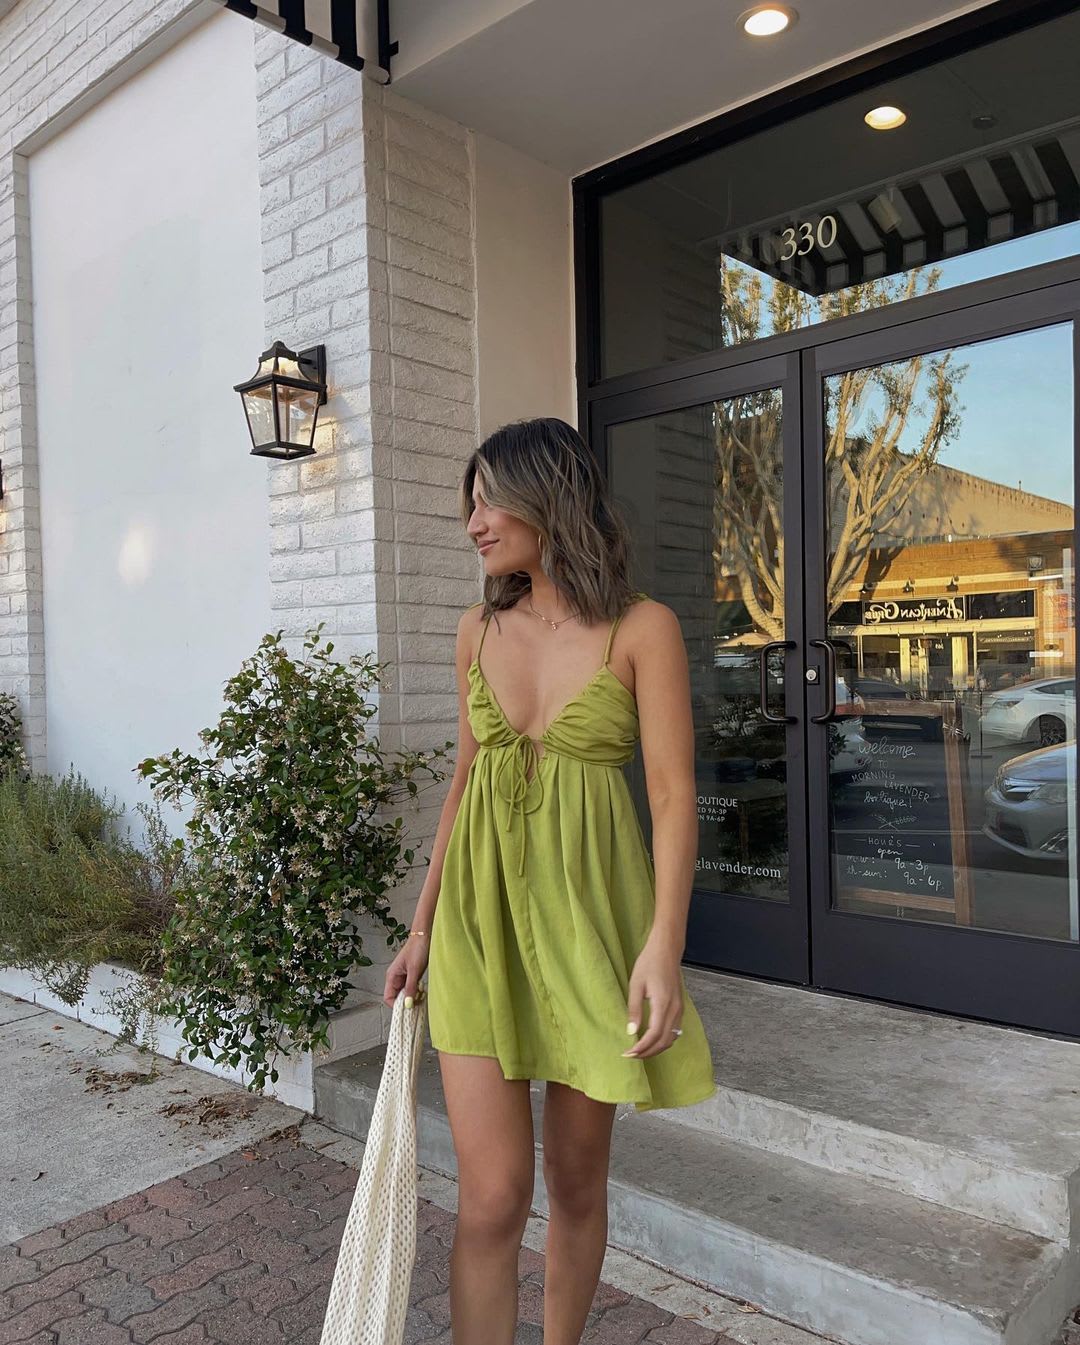 24 Sexy Summer Outfits You'll Want to Copy This Season - Lulus.com Fashion  Blog